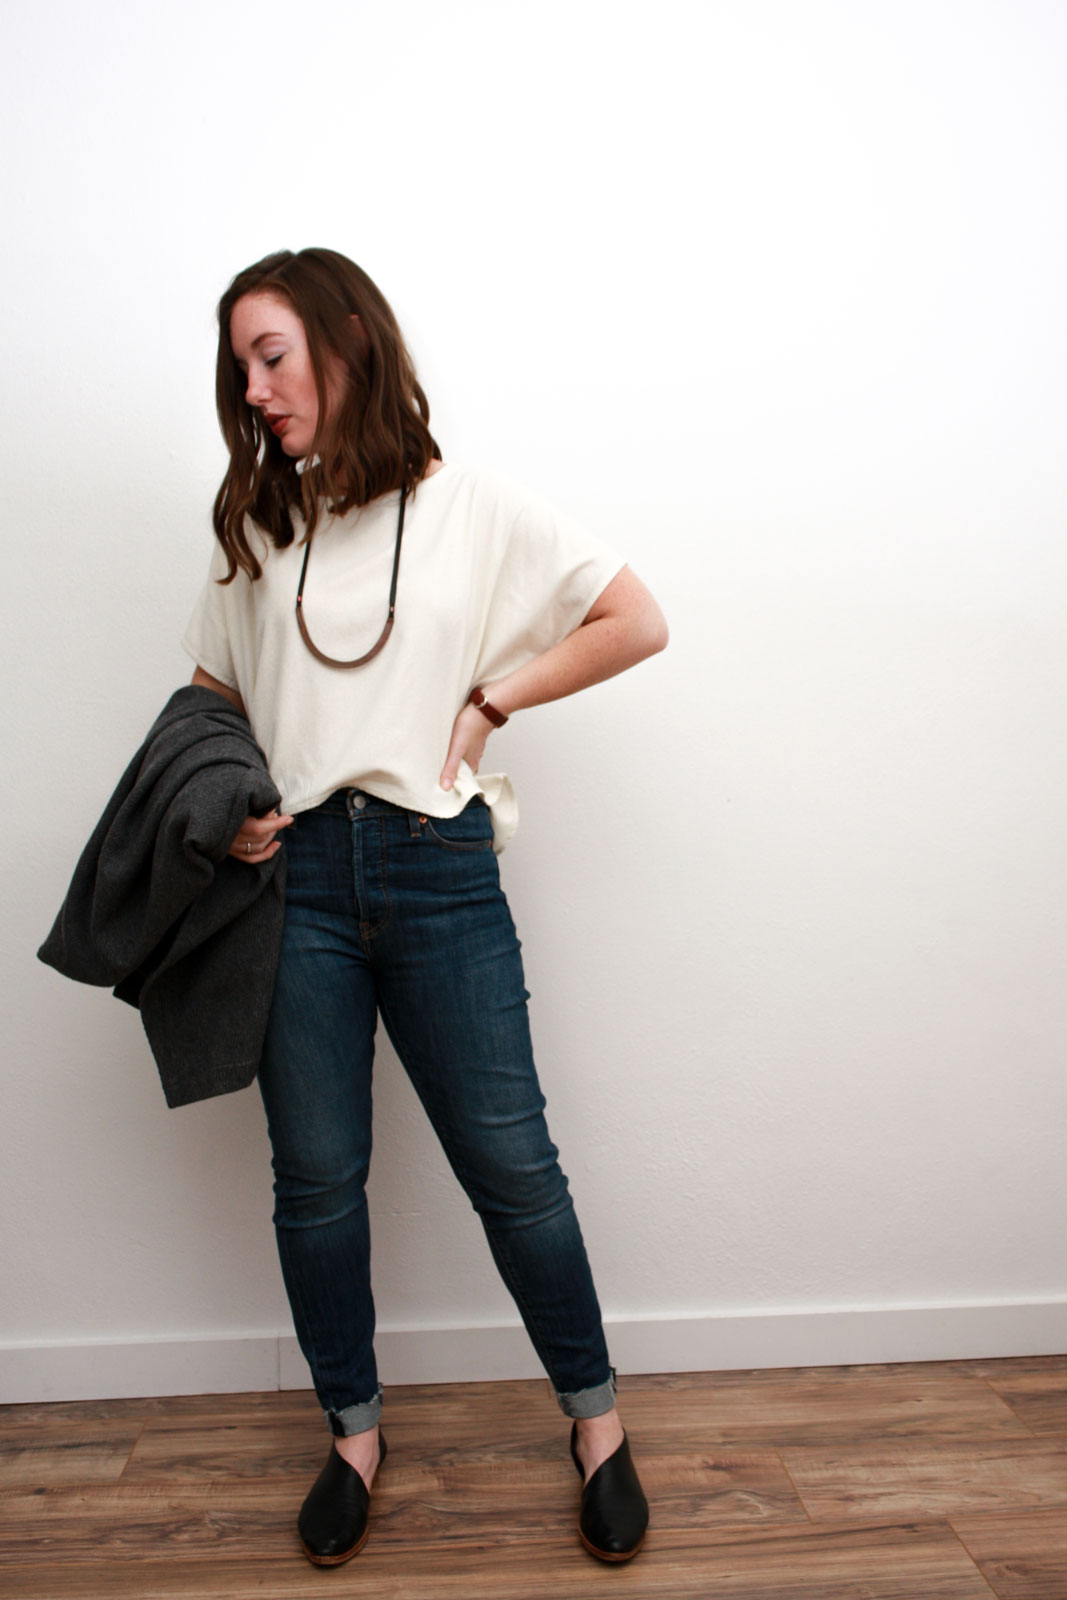 Alyssa wears a cream silk top, blue skinny jeans, and black asymmetrical flats while carrying a grey sweater